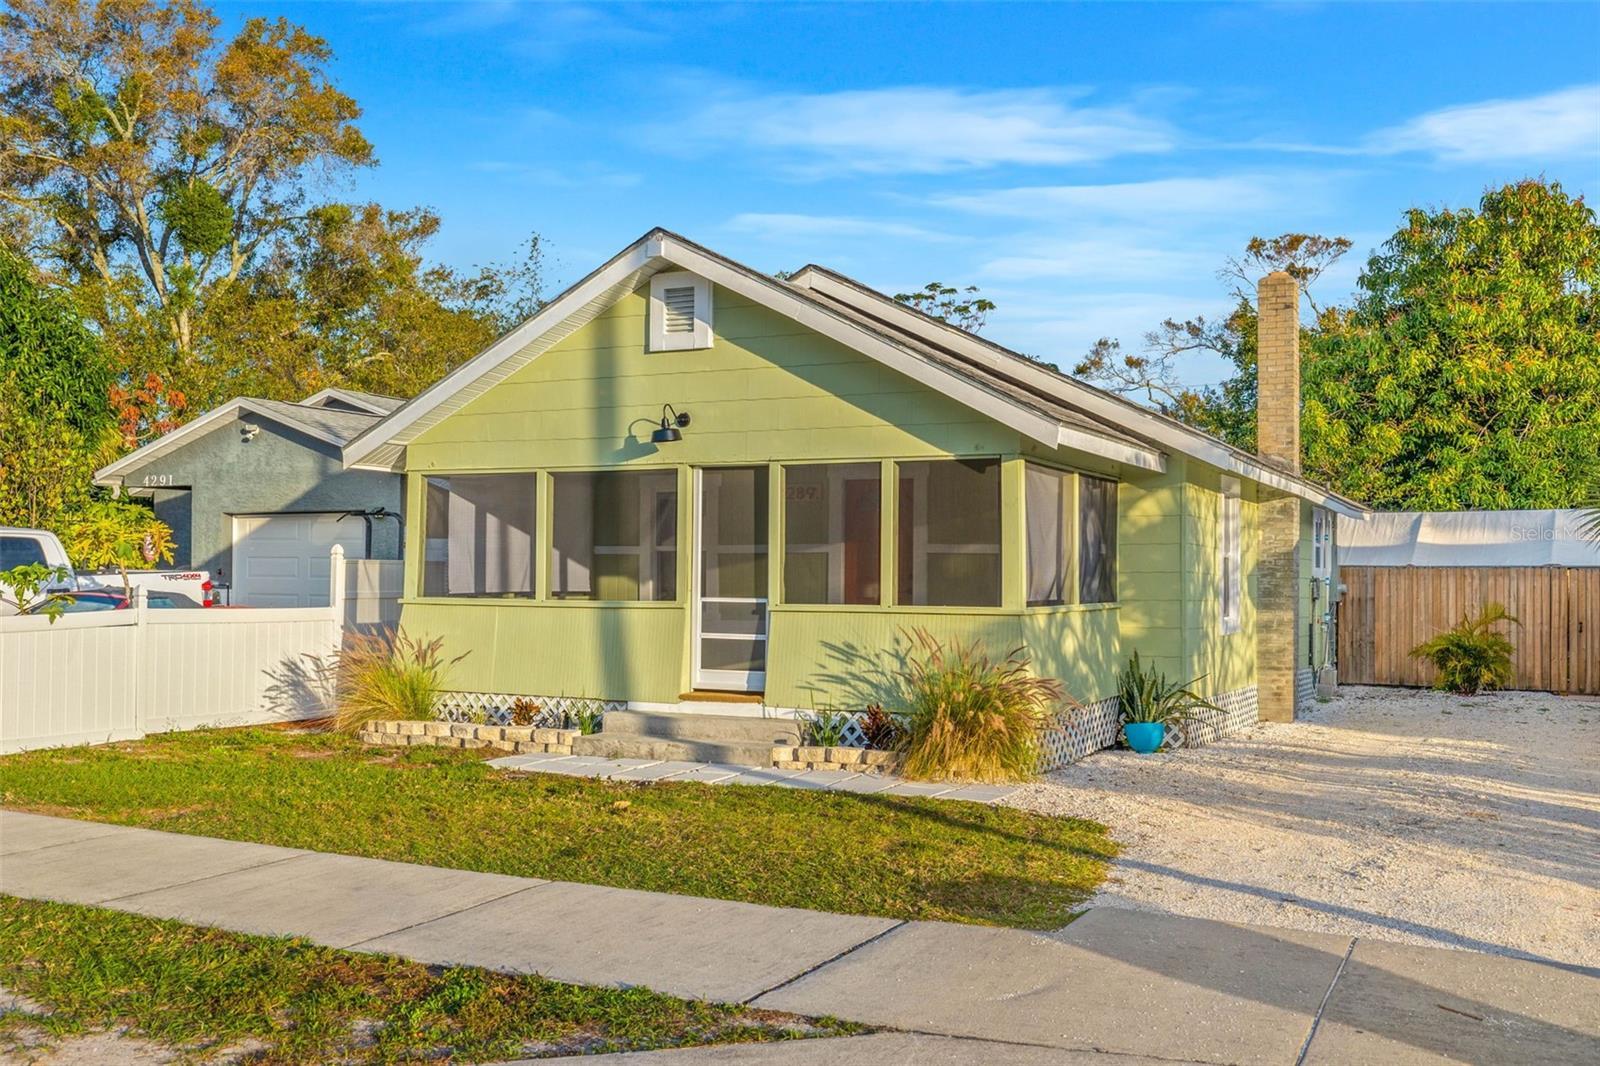 Photo one of 4289 57Th N Ave St Petersburg FL 33714 | MLS A4596058